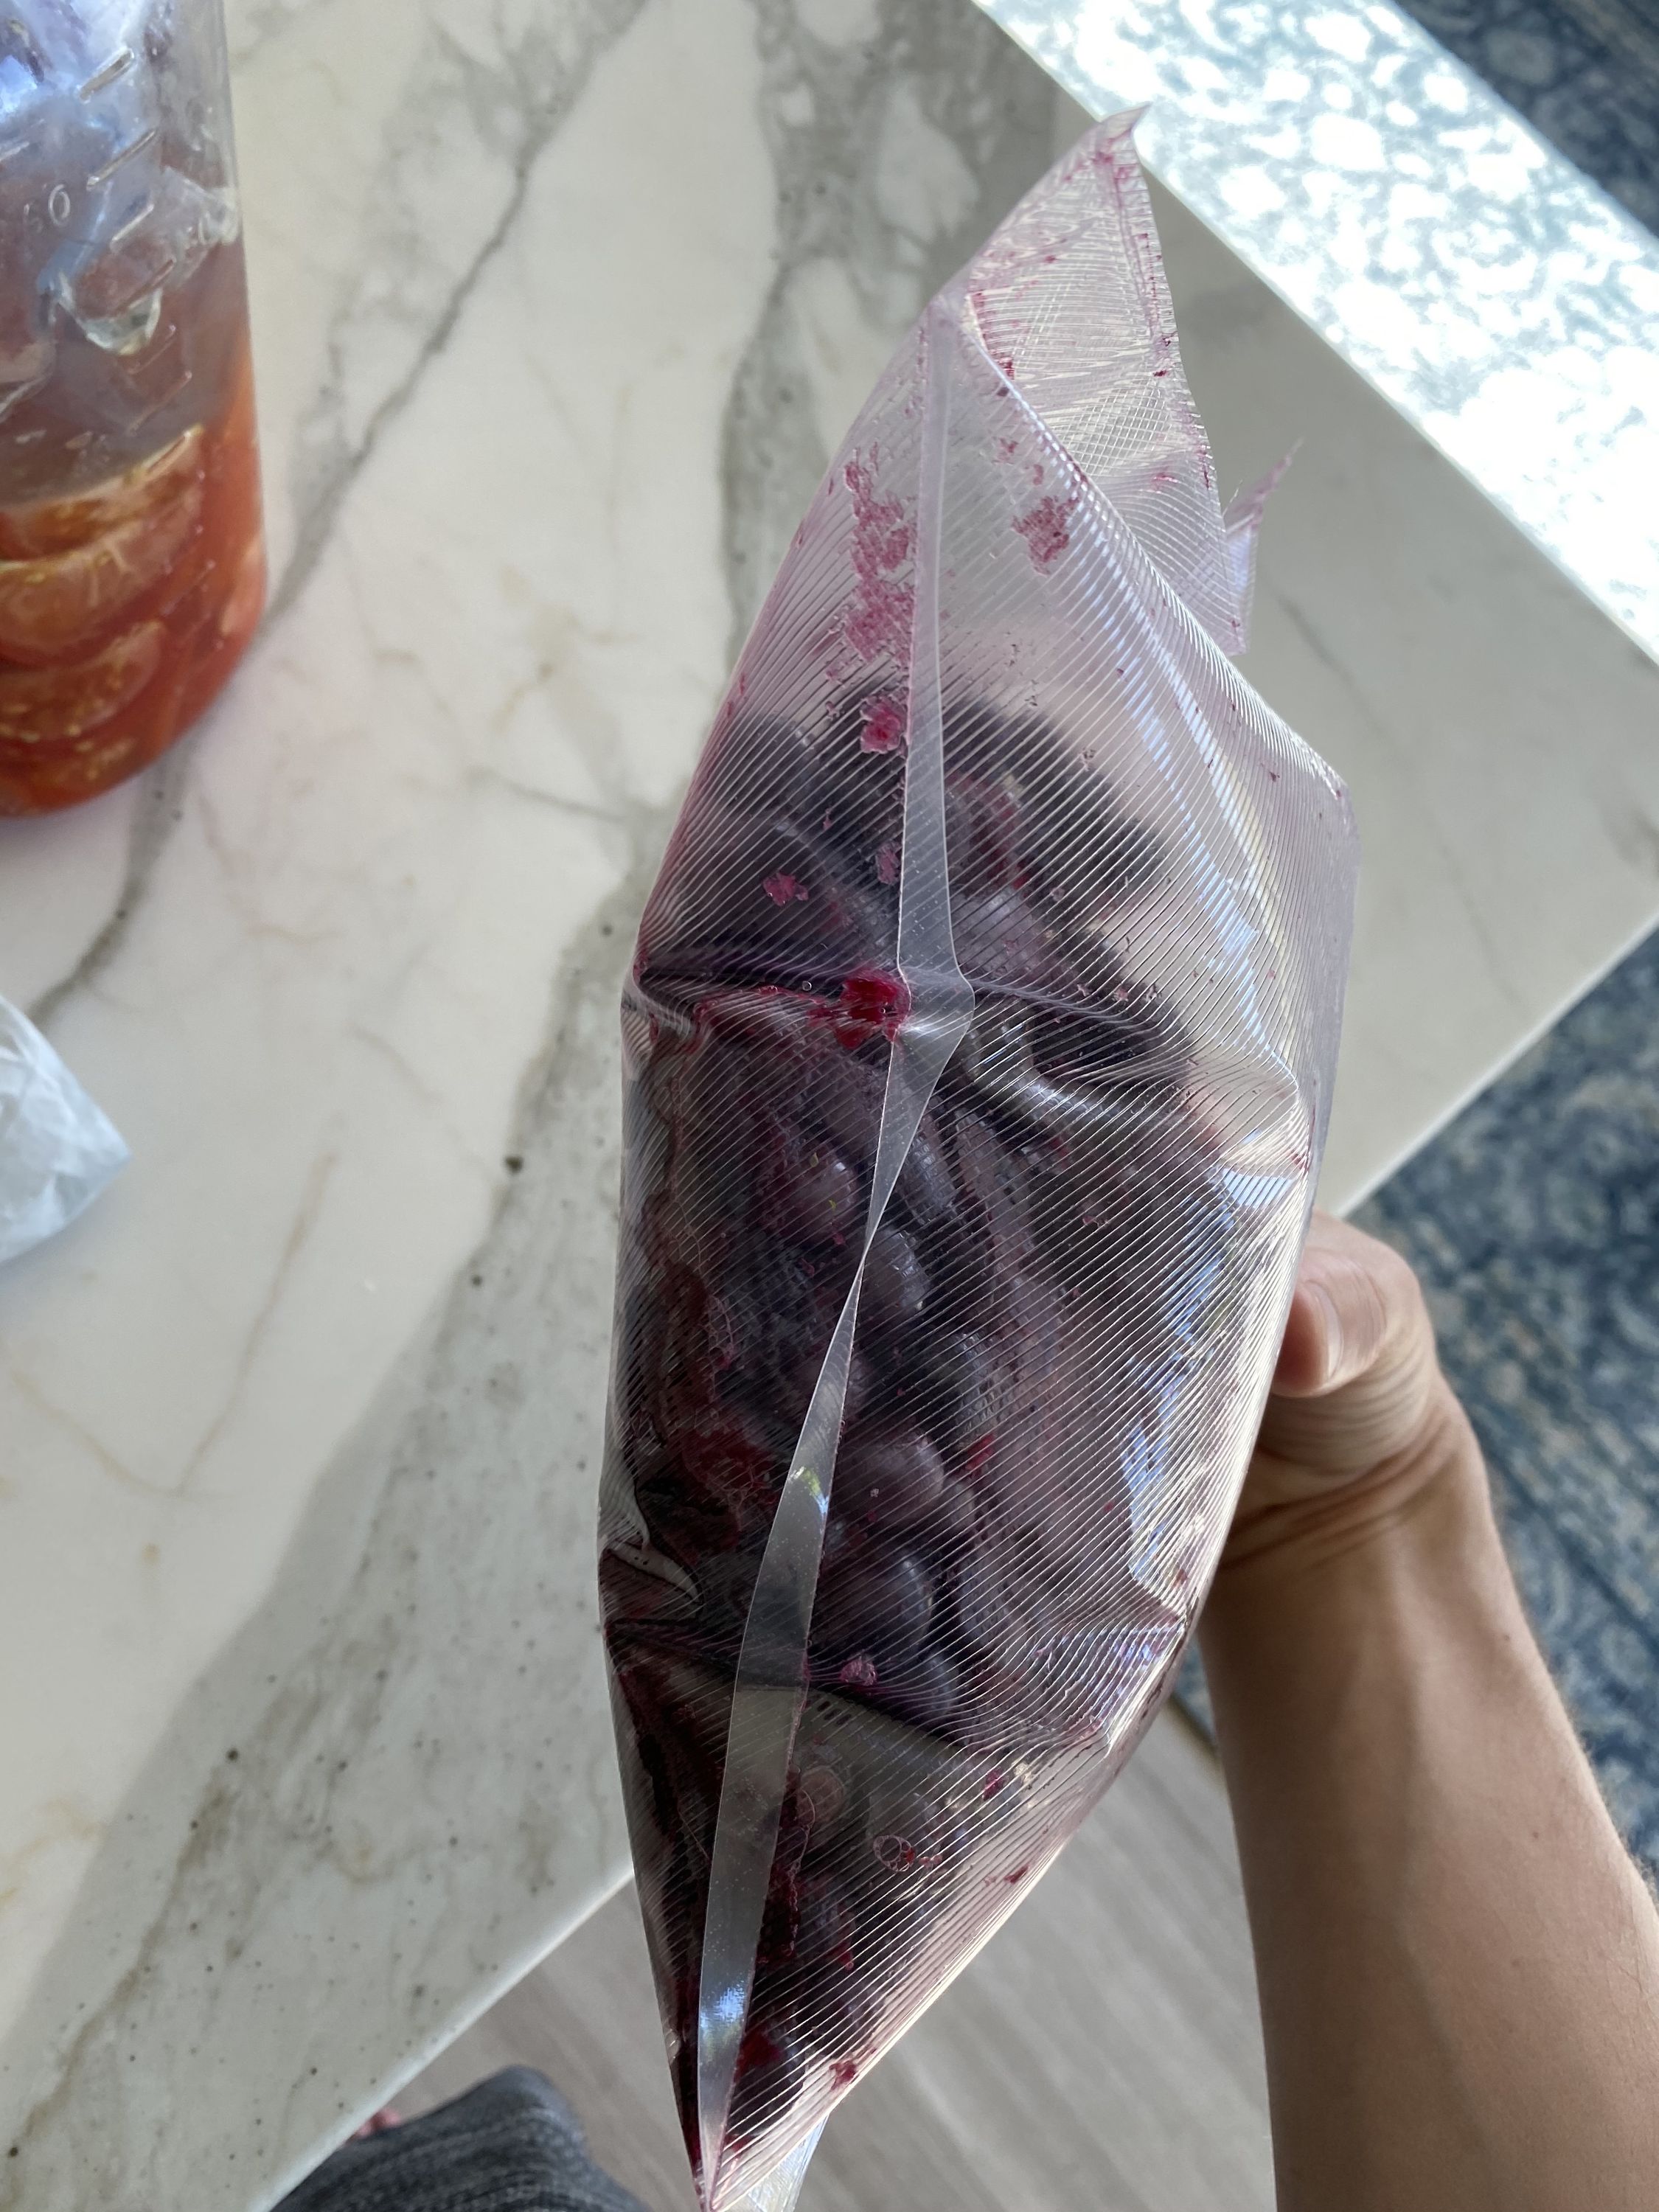 A vacuum-sealed bag of blueberries, puffy with gas